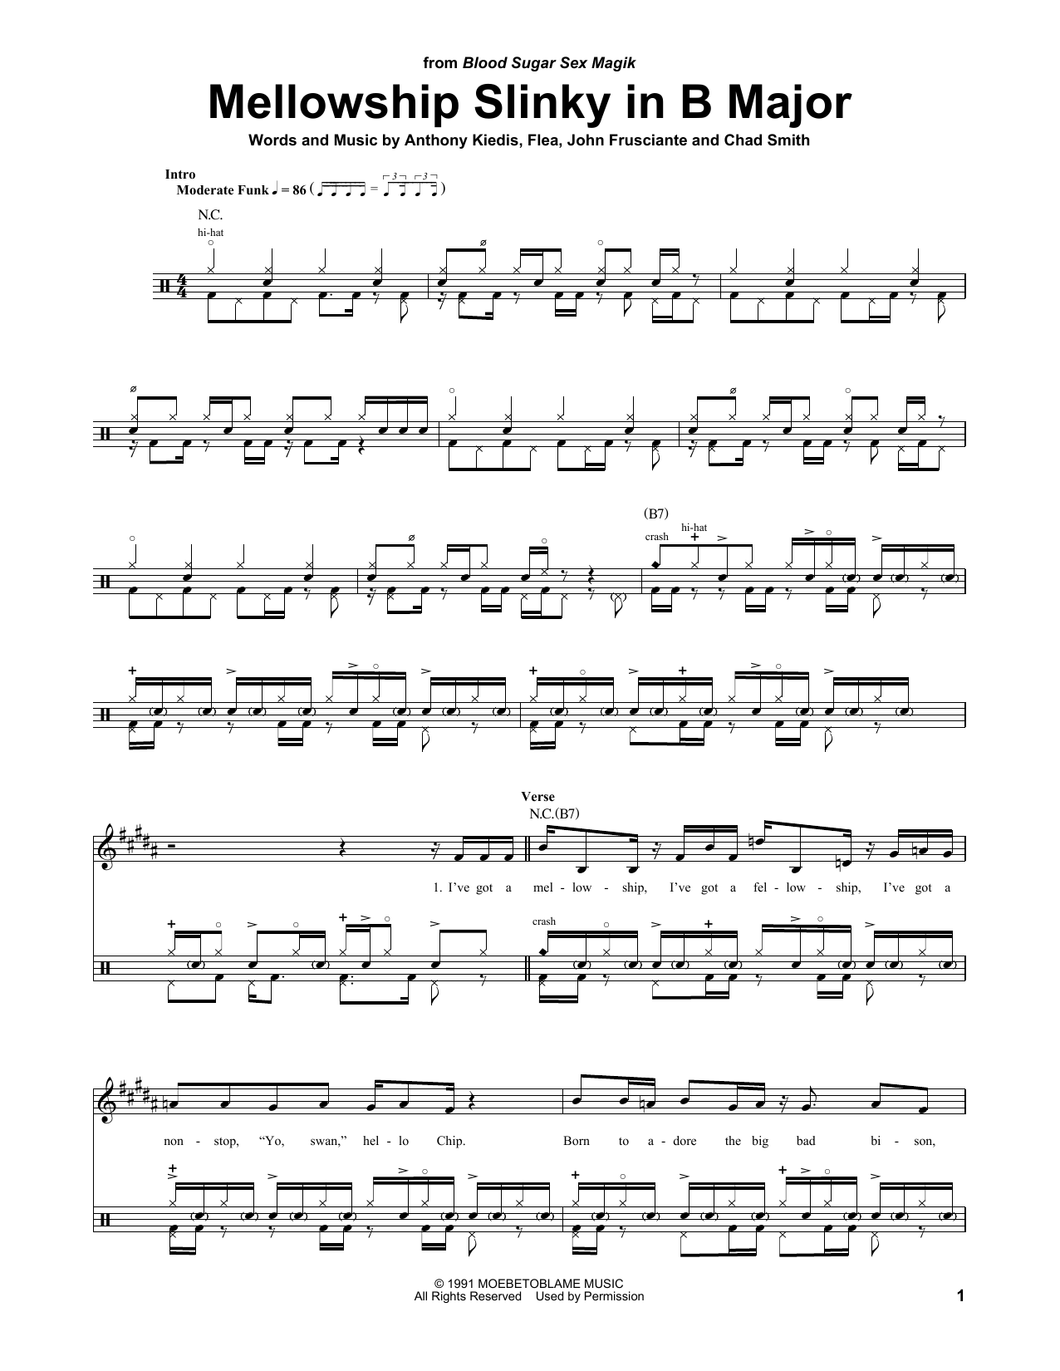 Mellowship Slinky in B Major - Red Hot Chili Peppers - Full Drum Transcription / Drum Sheet Music - SheetMusicDirect DT